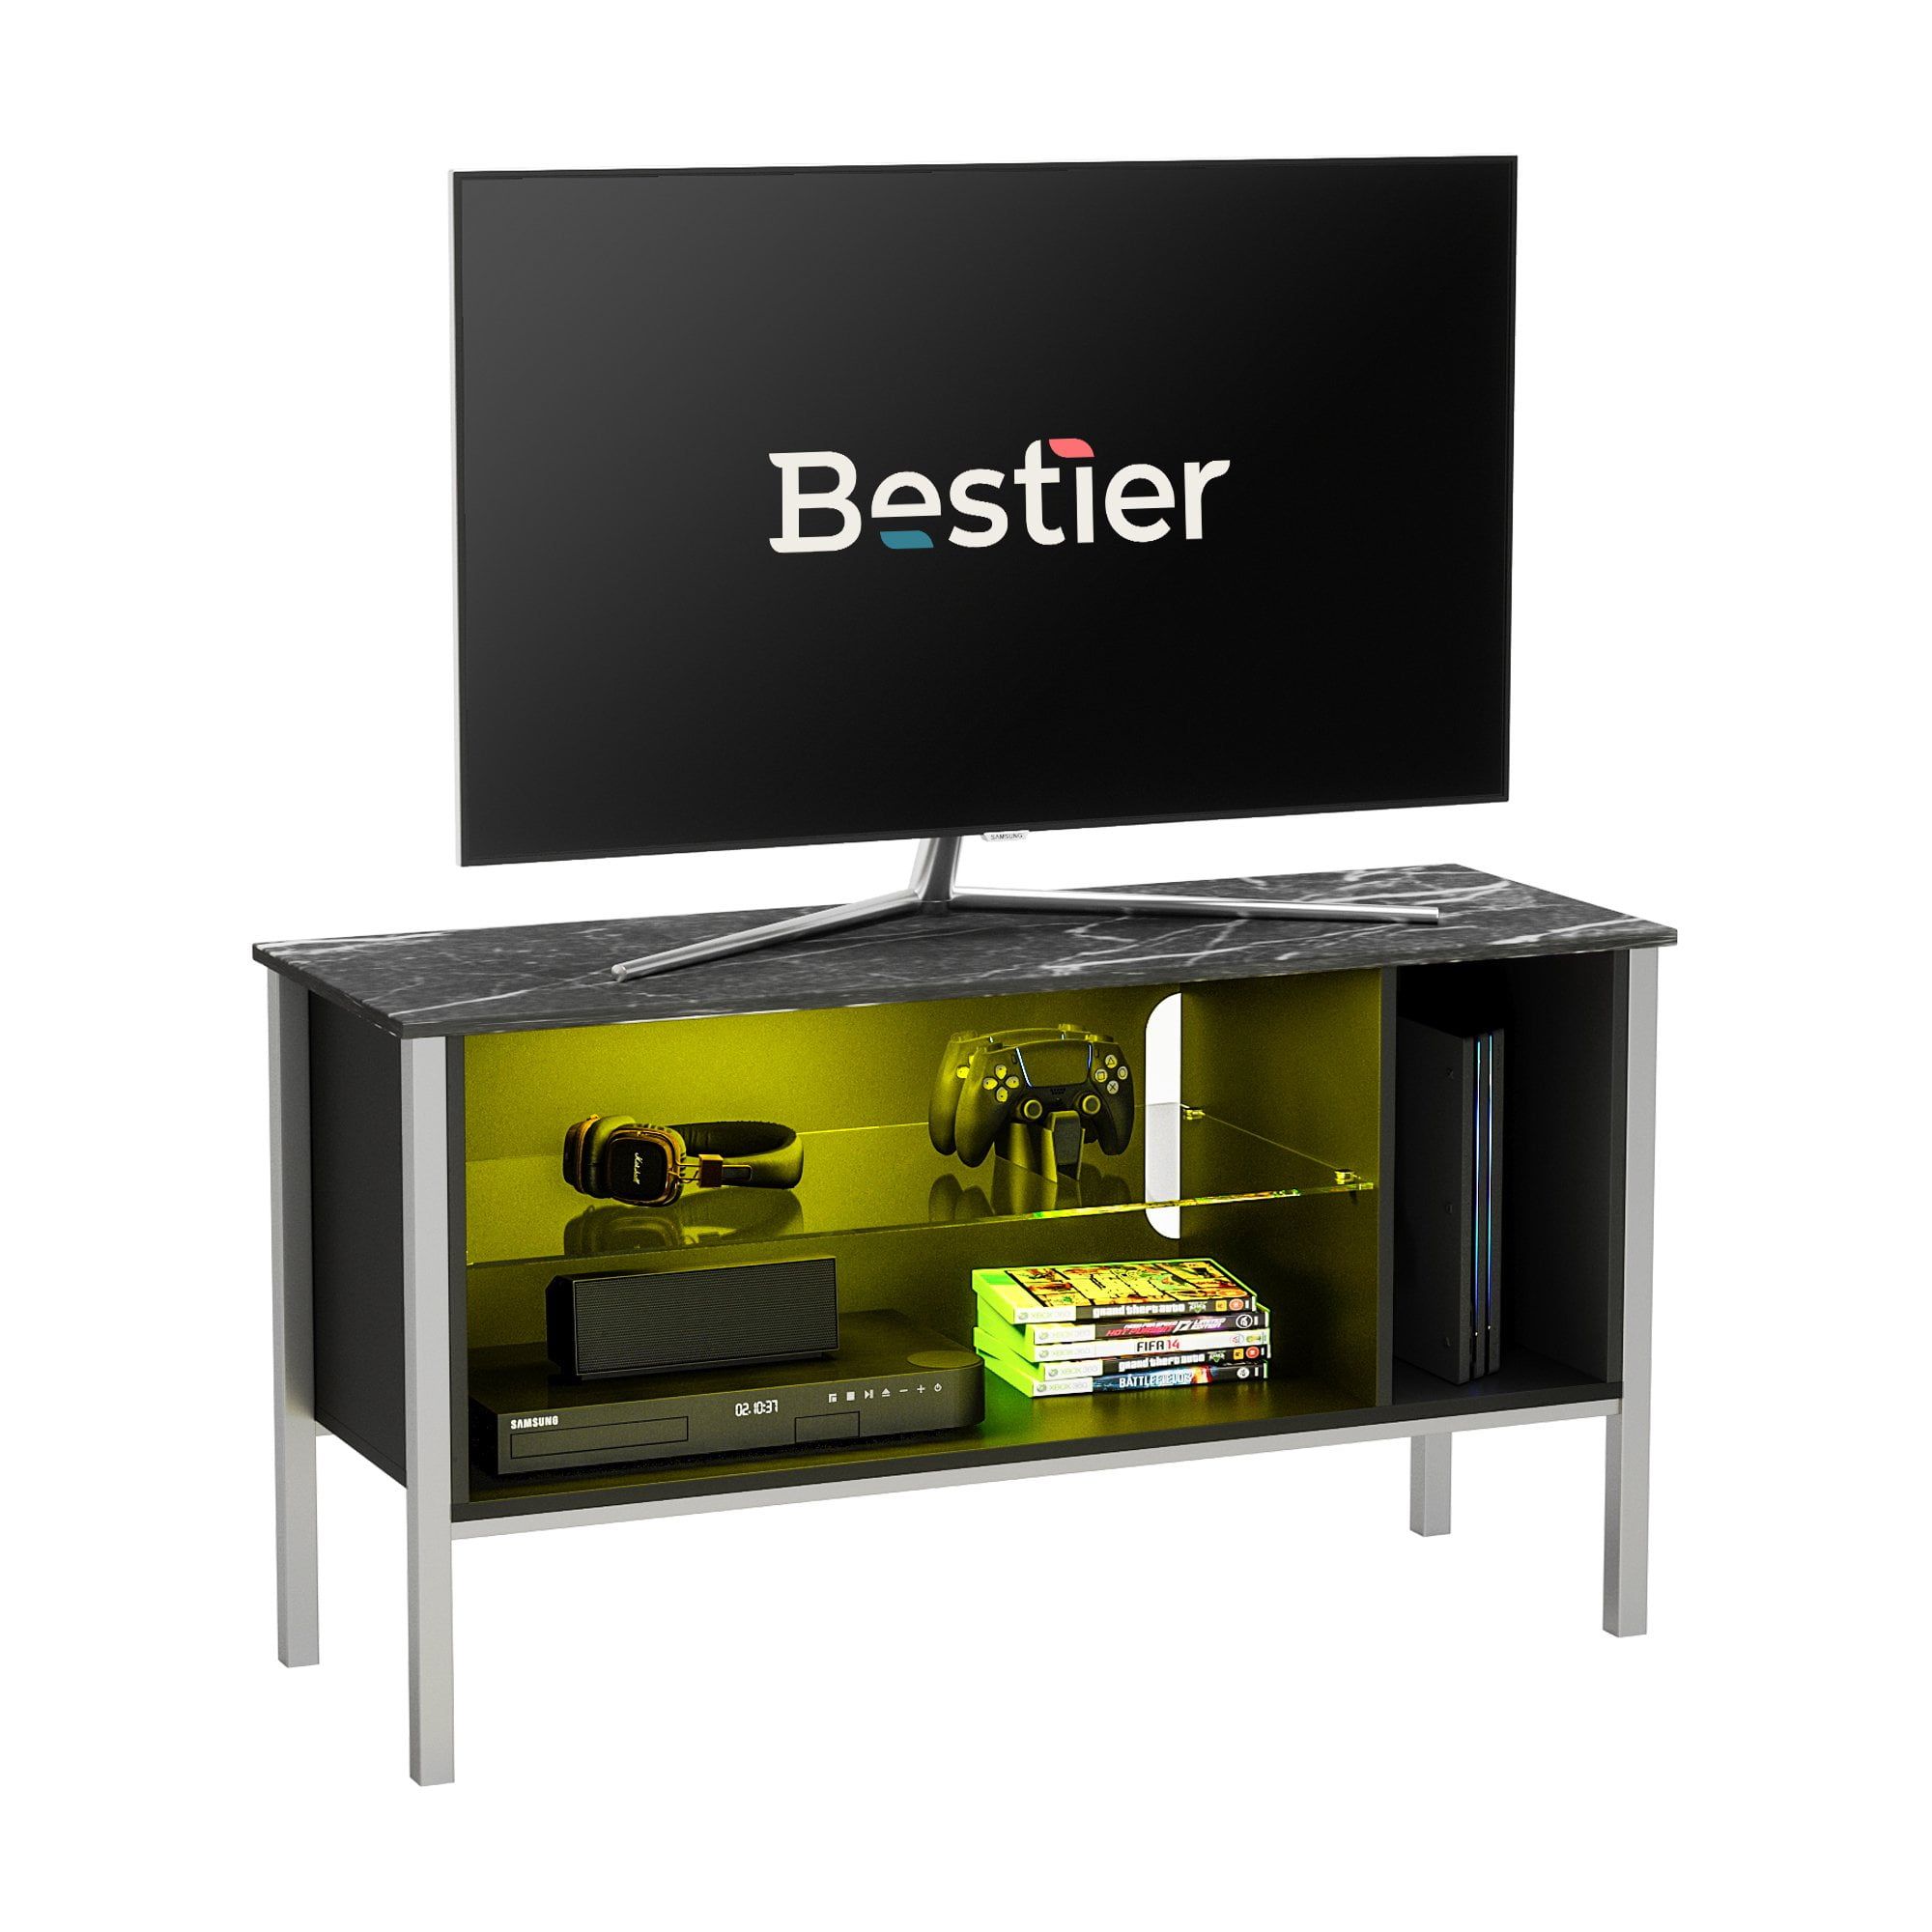 Bestier Gaming Tv Stand For Tvs Up To 50" With Led Light & Storage Intended For Bestier Tv Stand For Tvs Up To 75" (View 20 of 20)